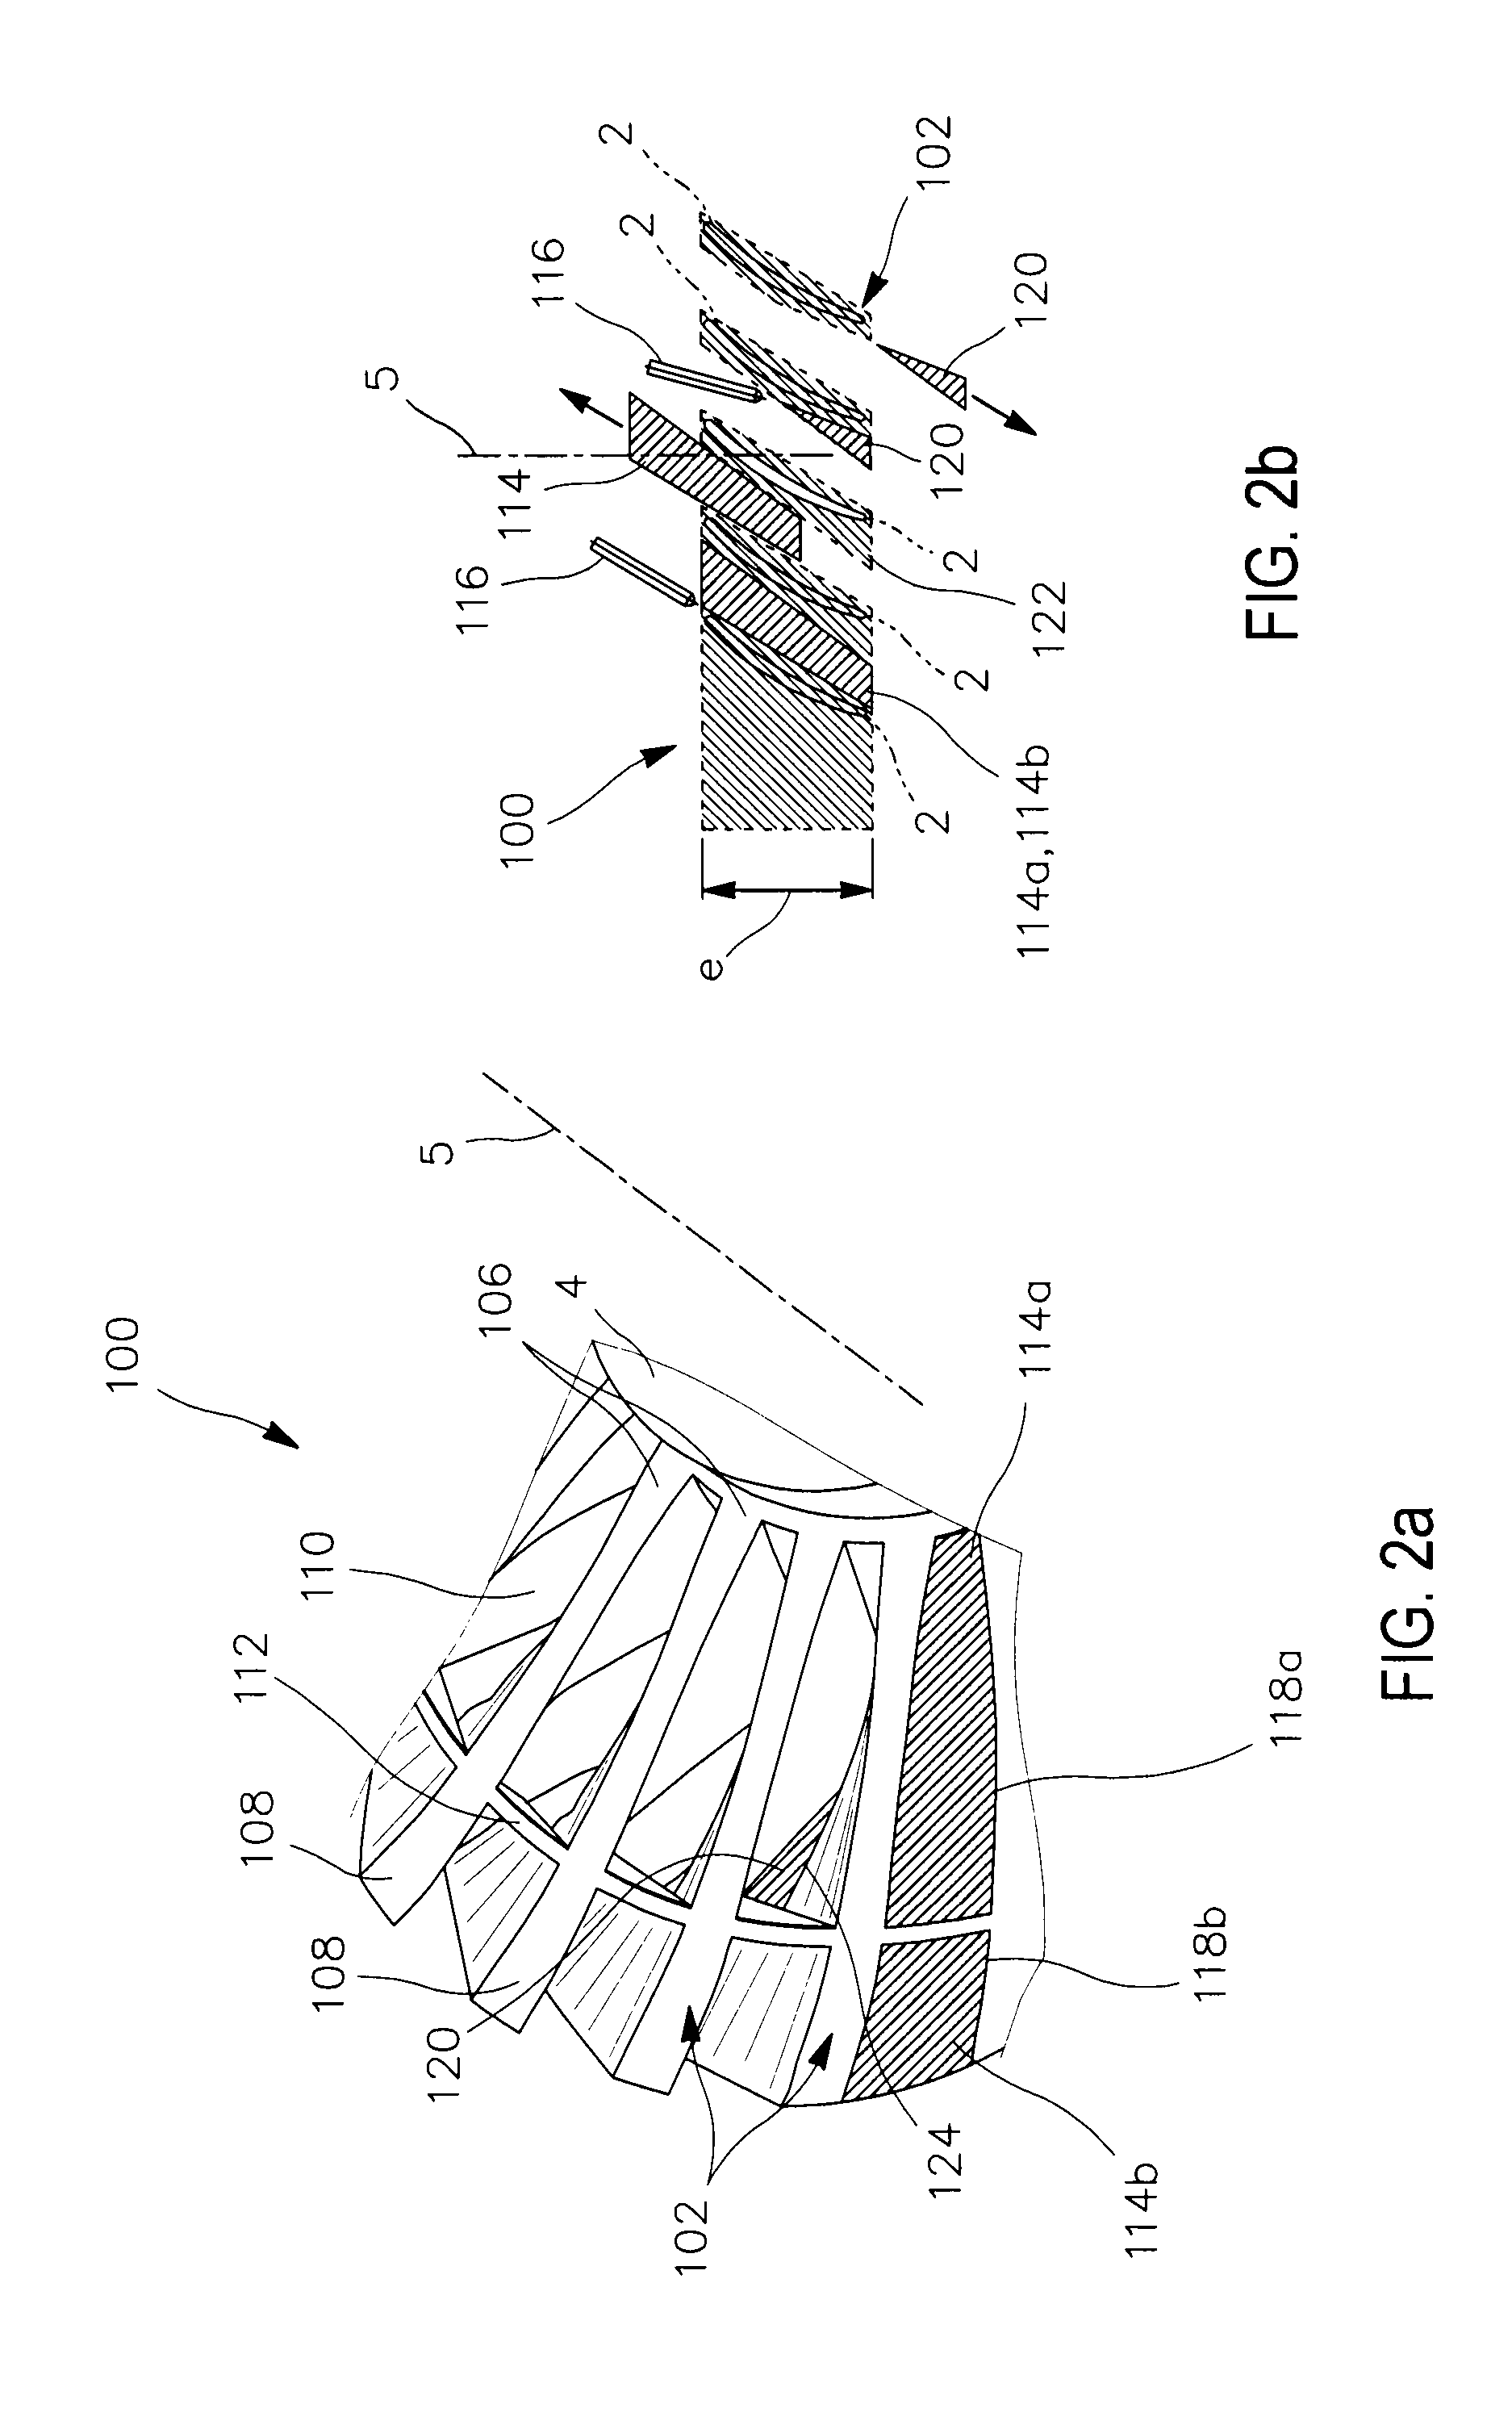 Process for manufacturing a single-piece blisk with a temporary blade support ring arranged at a distance from blade tips